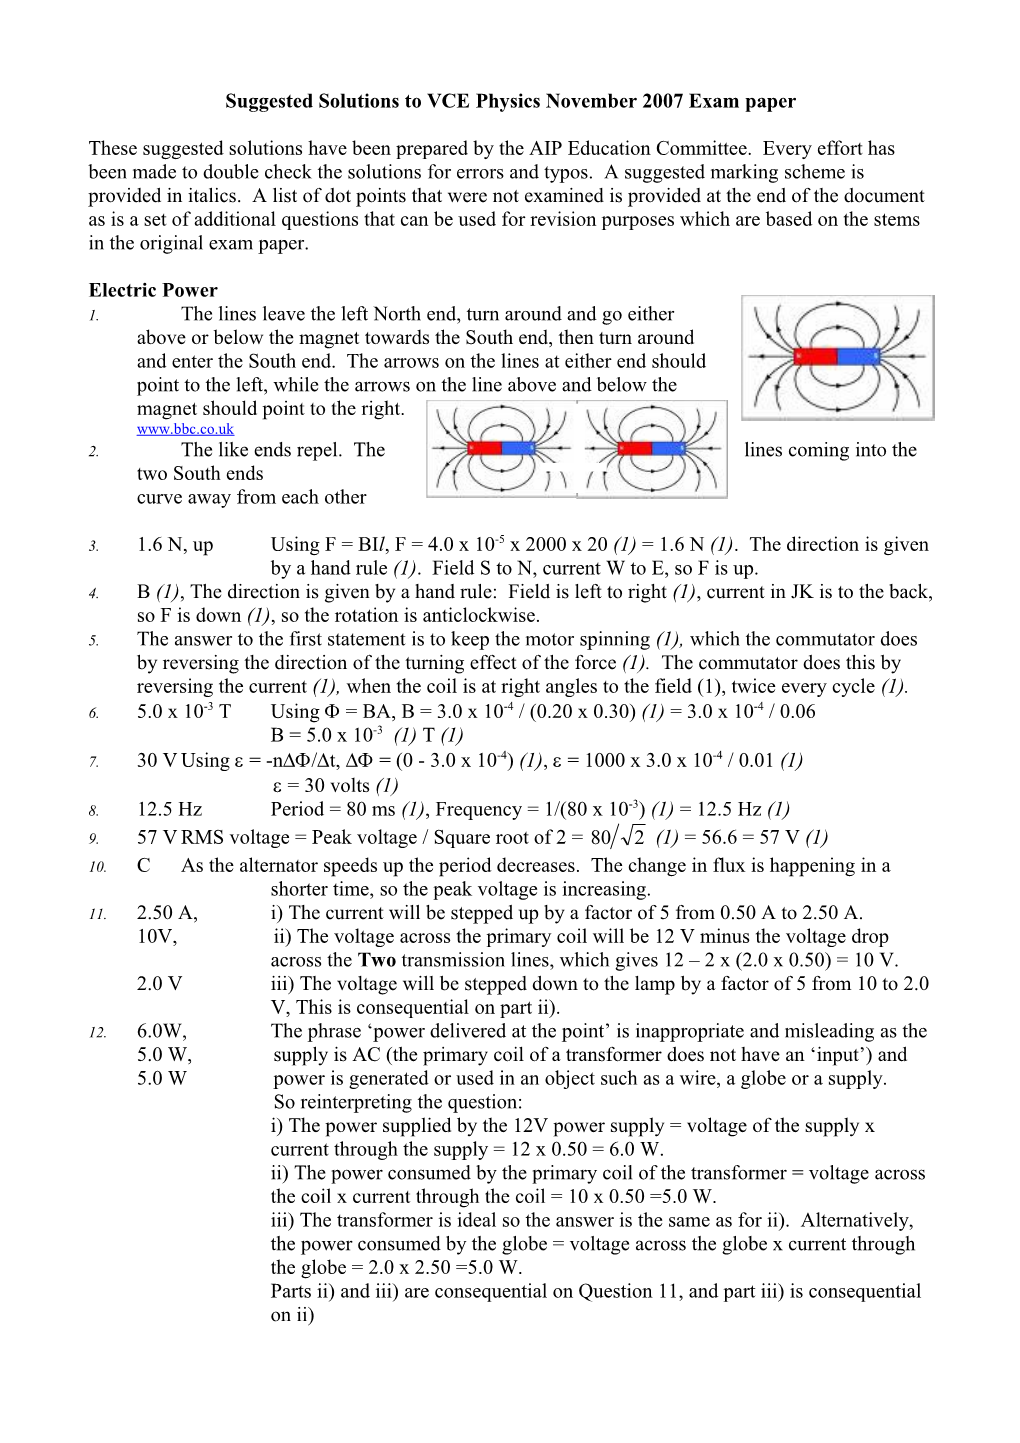 Solutions to VCE Physics November 2006 Exam Paper